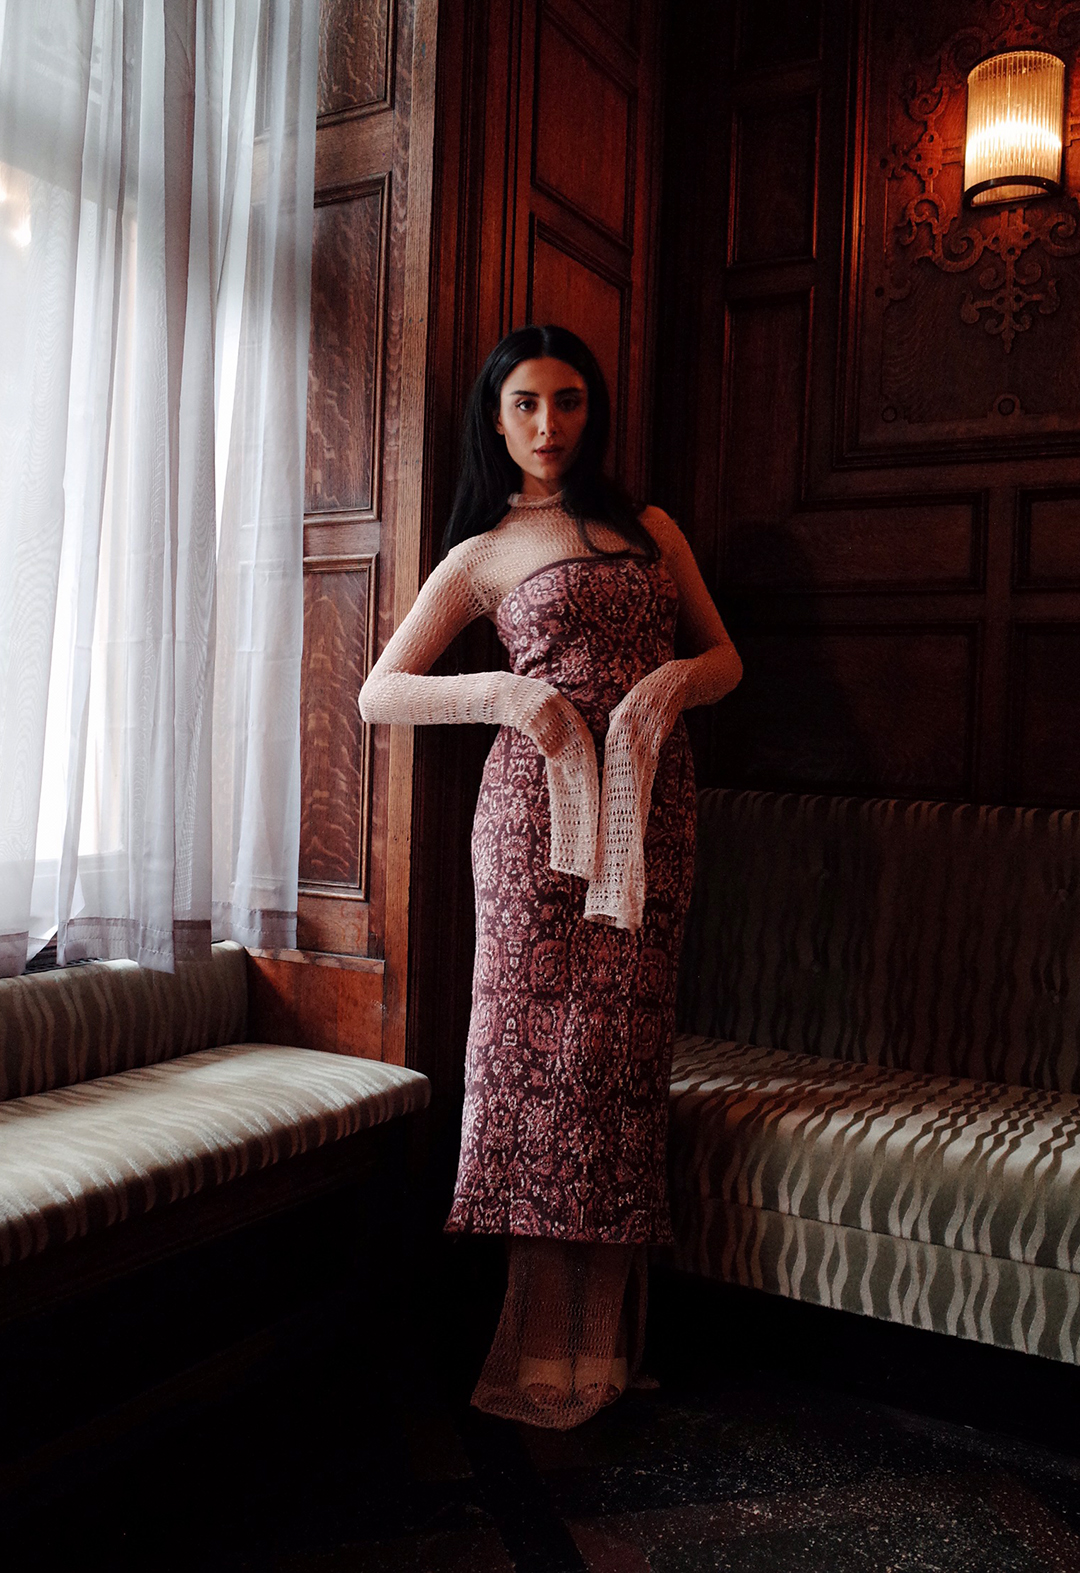 Photo of a model wearing a carpet inspired tube dress layered over sheer pointelle dress. She is standing near a window with a sheer curtain over it.